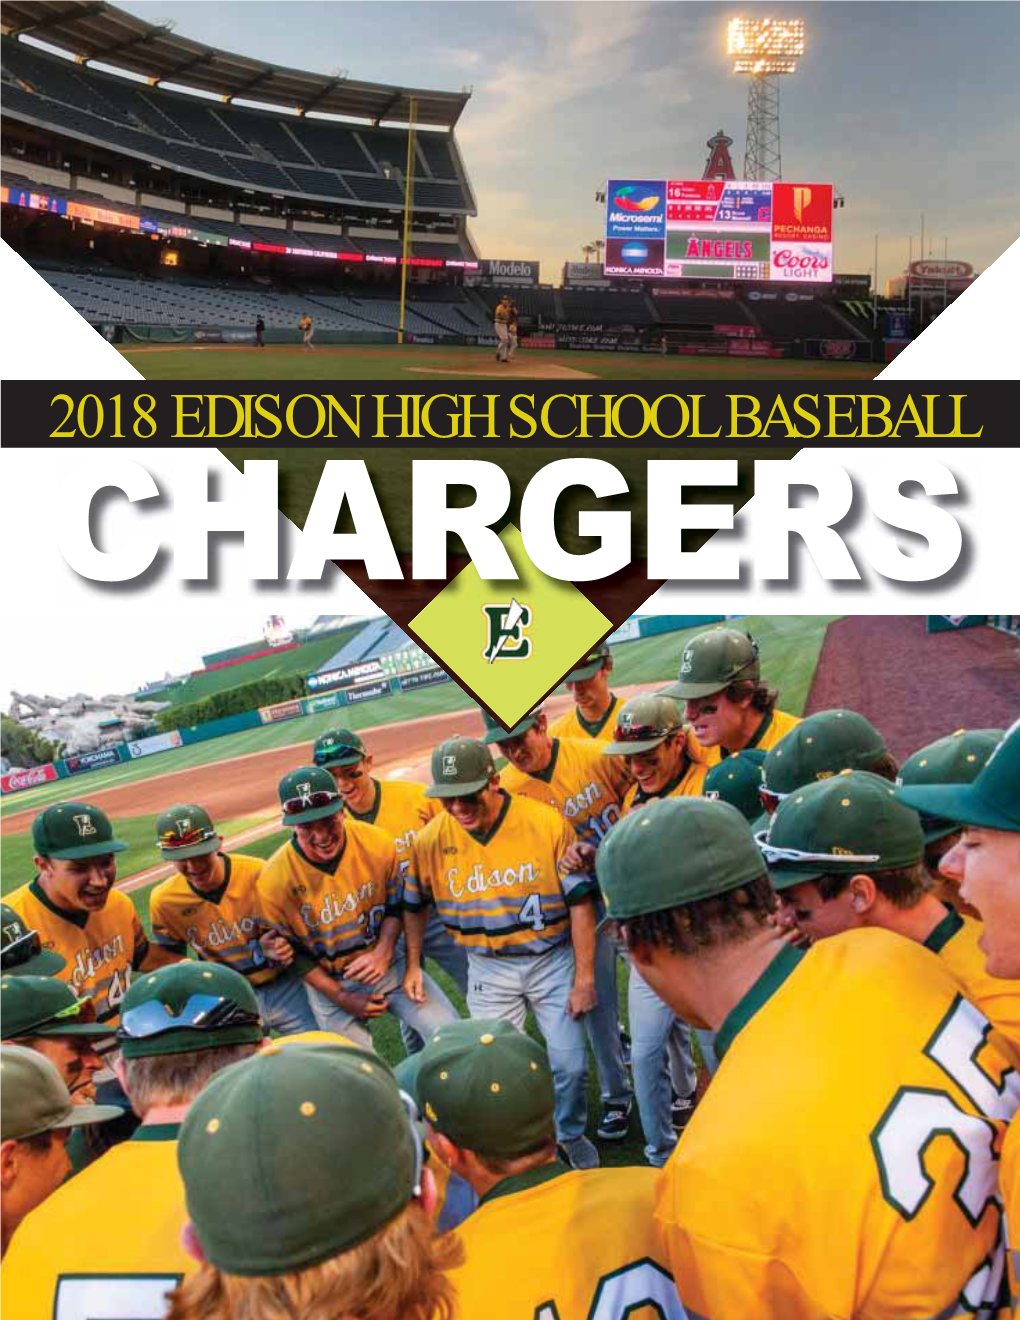 2018 EDISON HIGH SCHOOL BASEBALL CHARGERS CLASS of 2018 Congratulations Seniors Notes from Principal, Athletic Director and Booster Club President